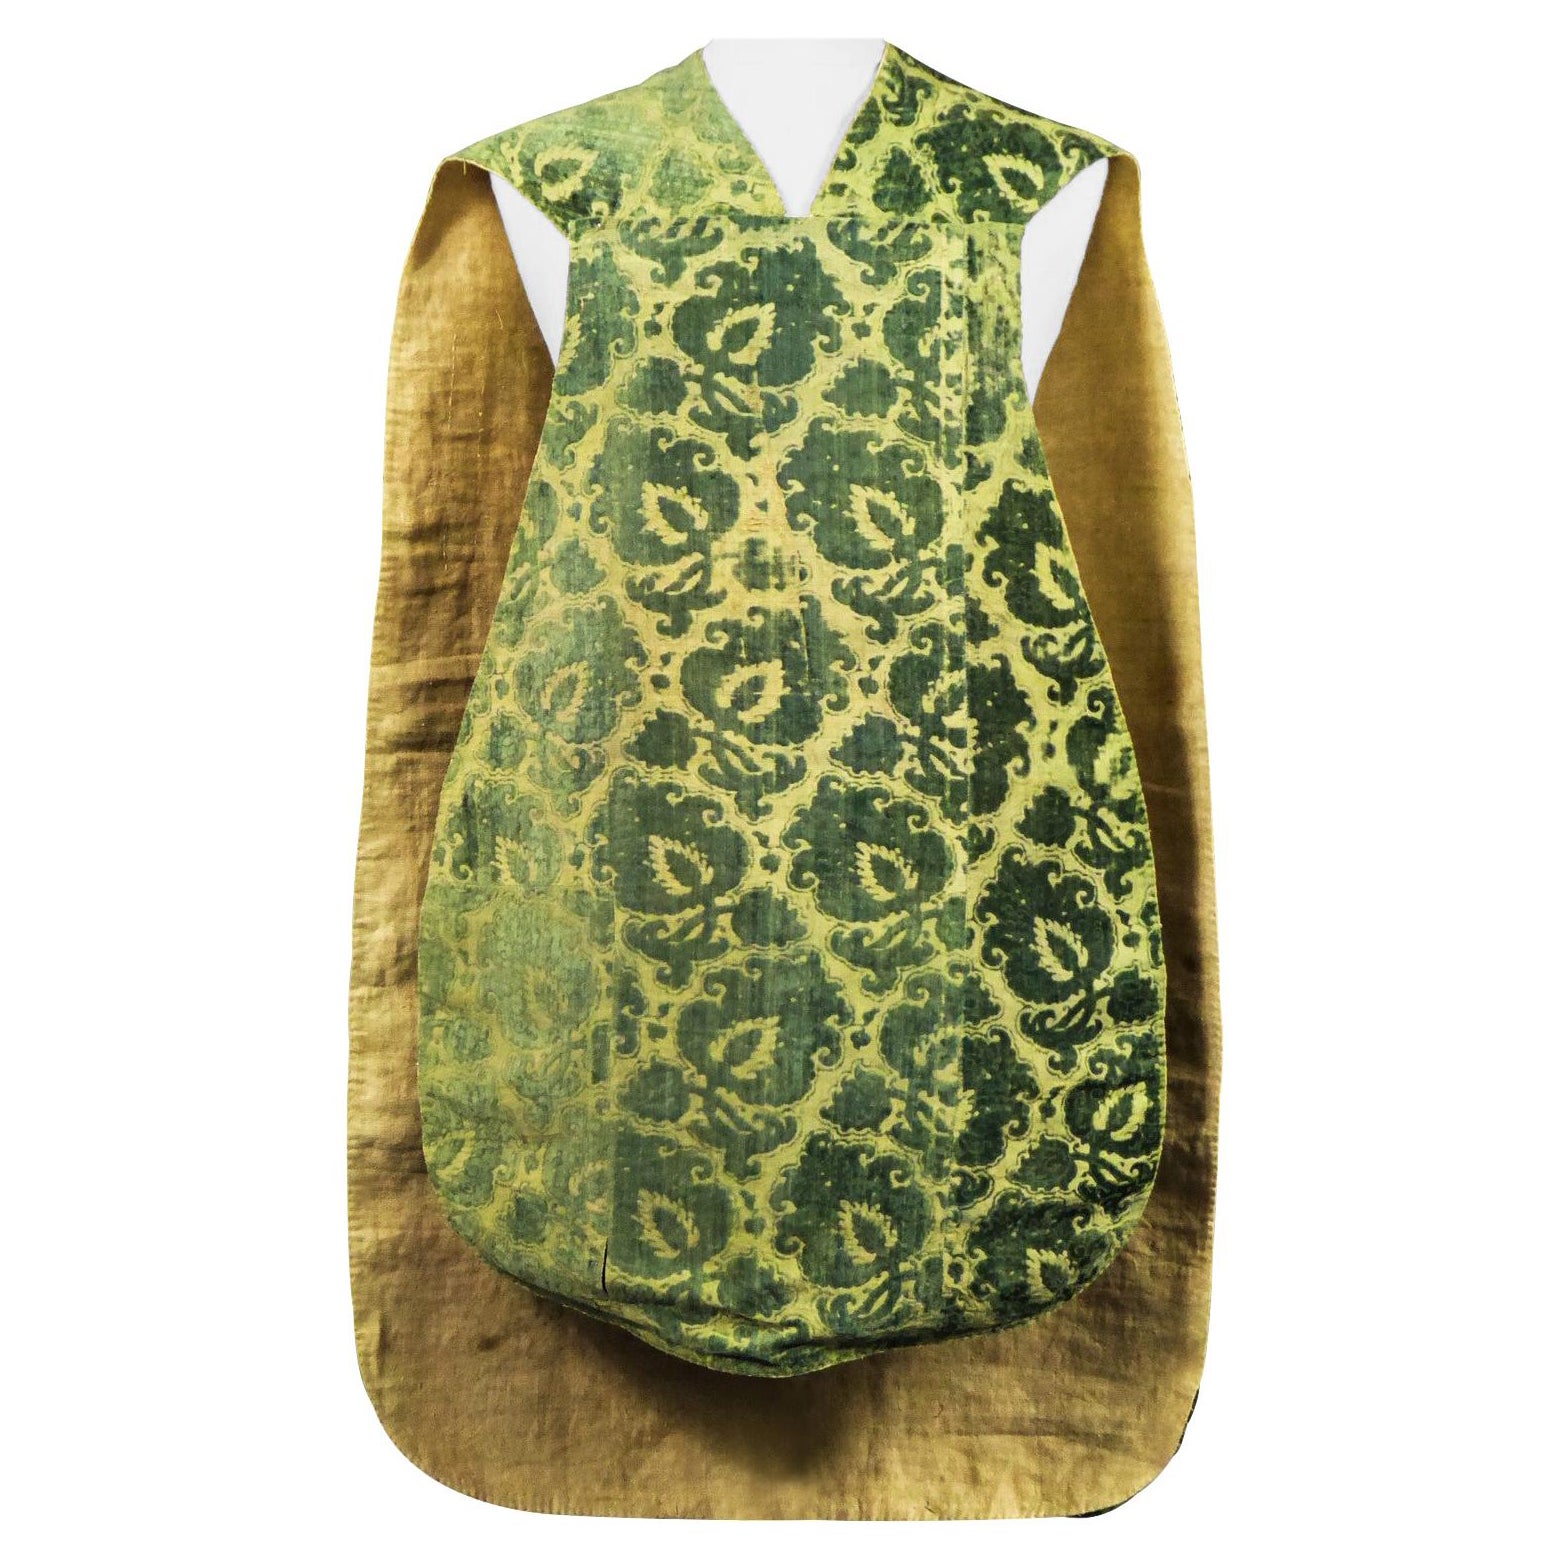 Rare Complete Chasuble in Chiseled Cut Velvet - Italy Late 16th Century